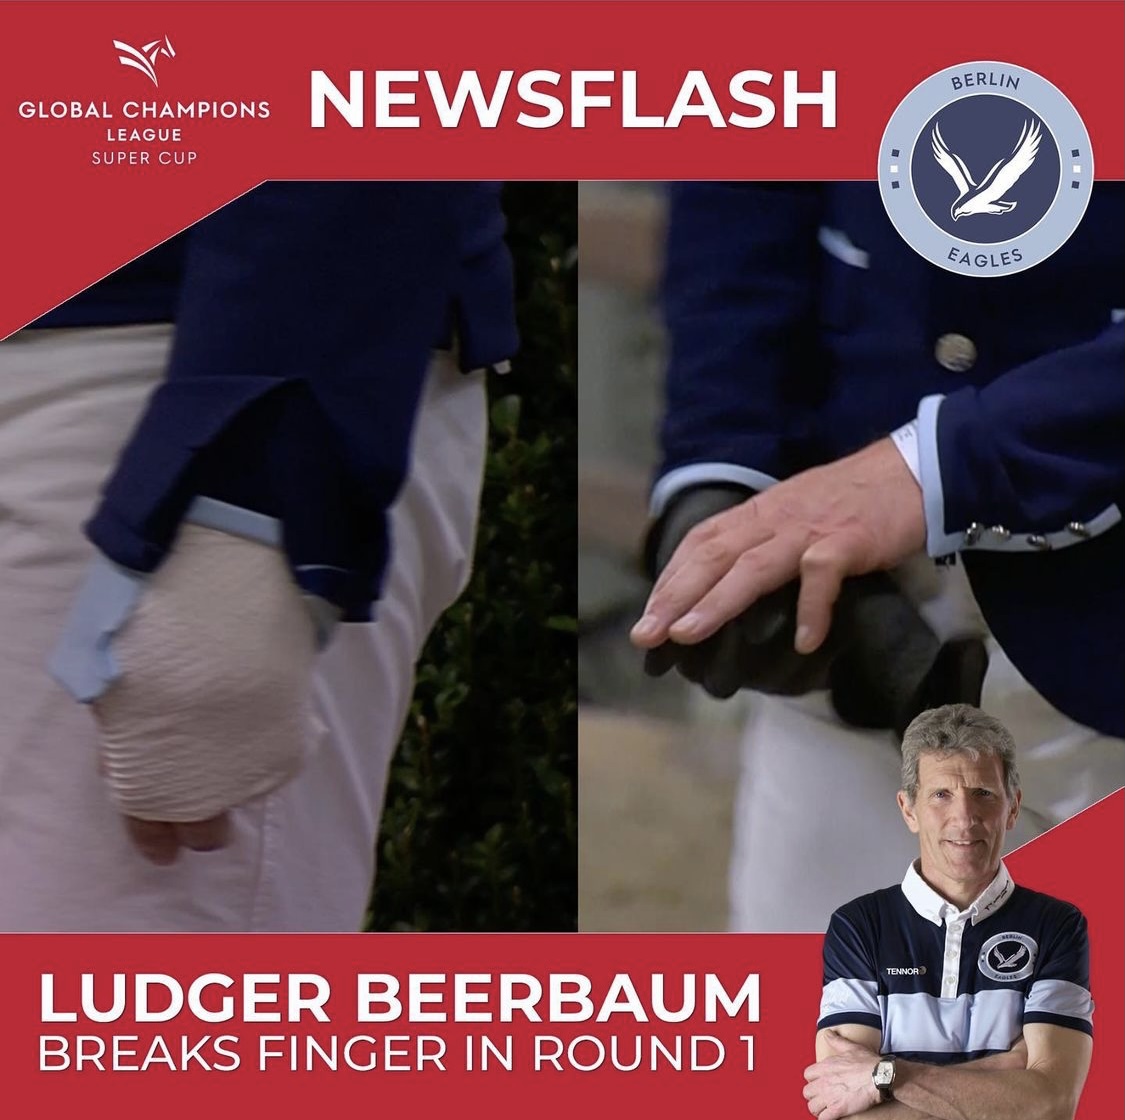 Ludger Beerbaum breaks finger during the first round of the GCL Super Cup in Prague